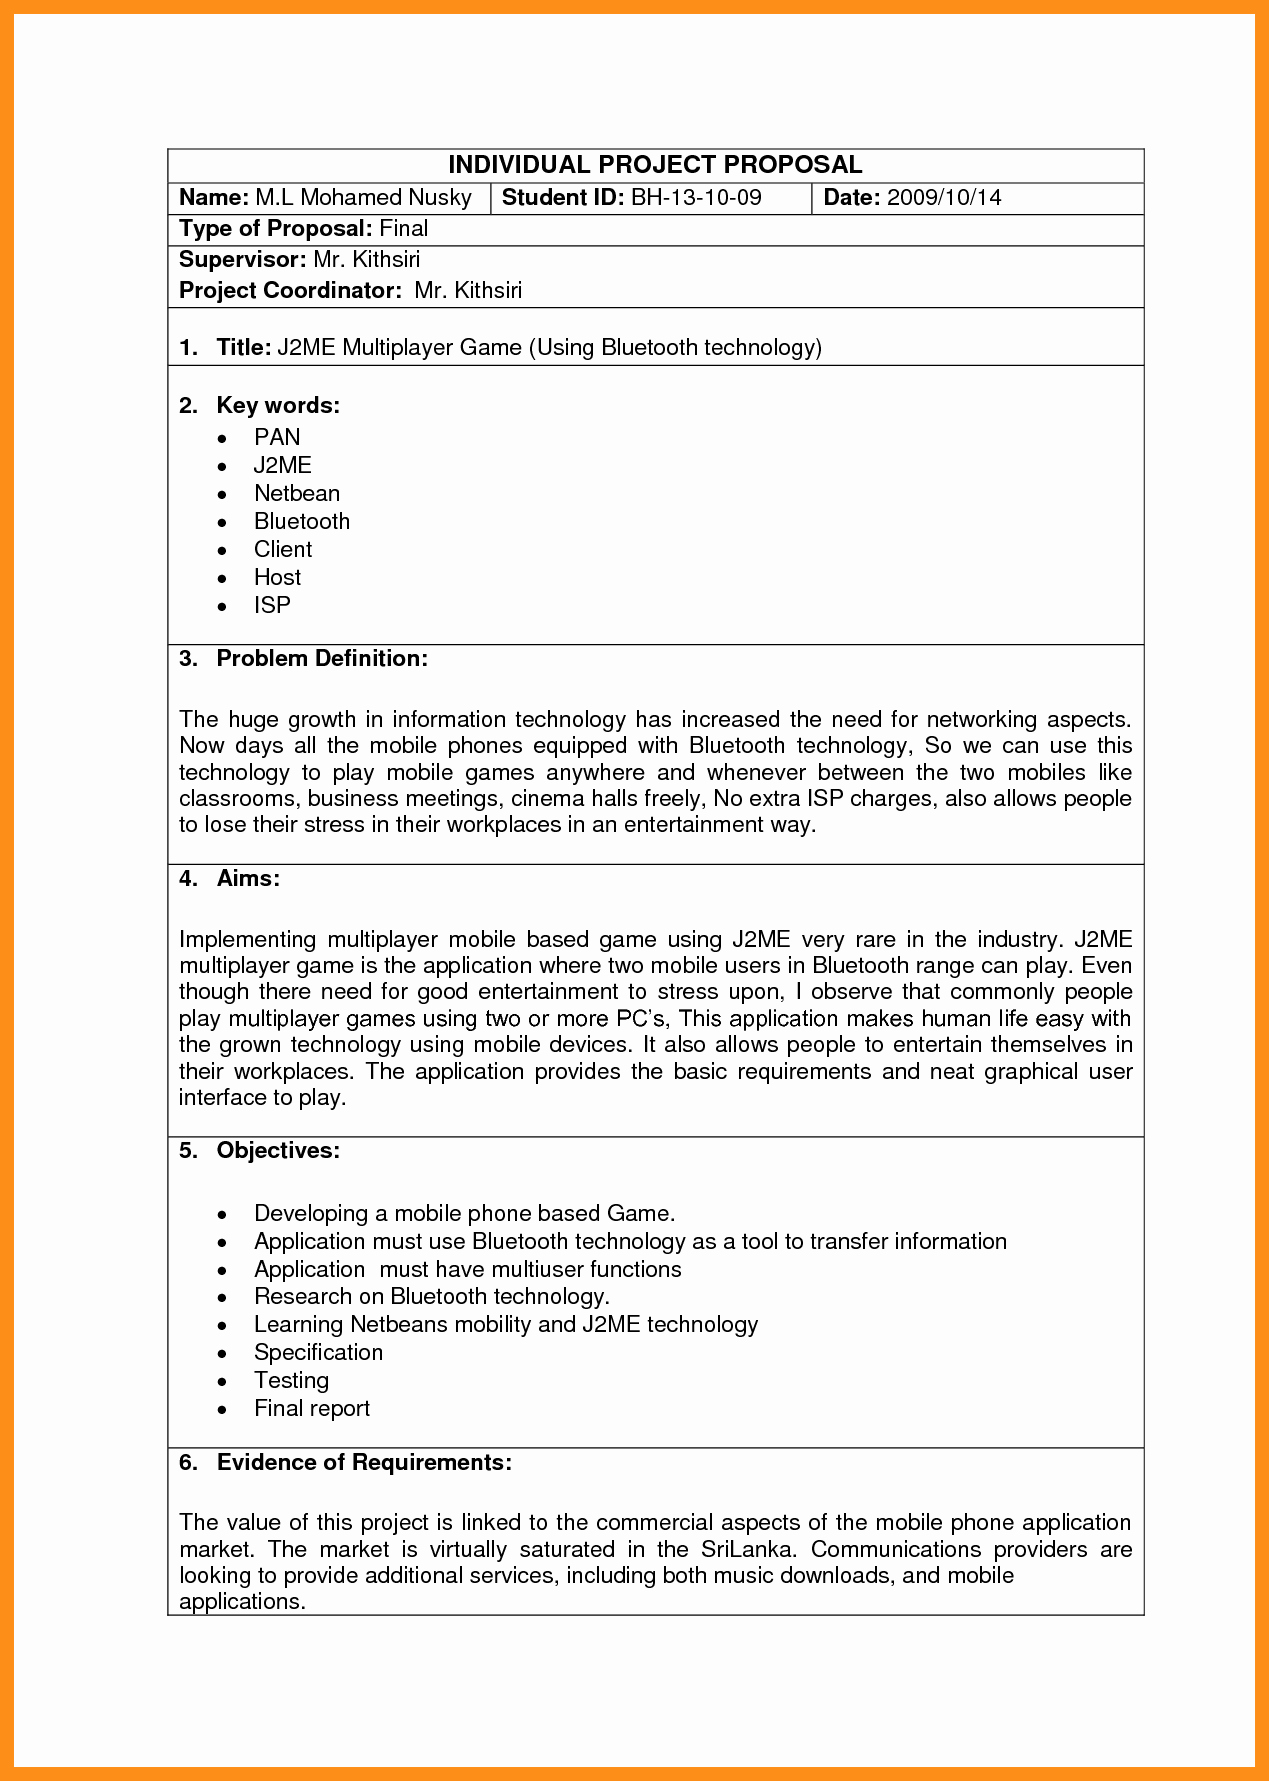 Engineering Project Proposal Template Best Of 35 Engineering Proposal Template 16 Engineering Design Proposal Template Network